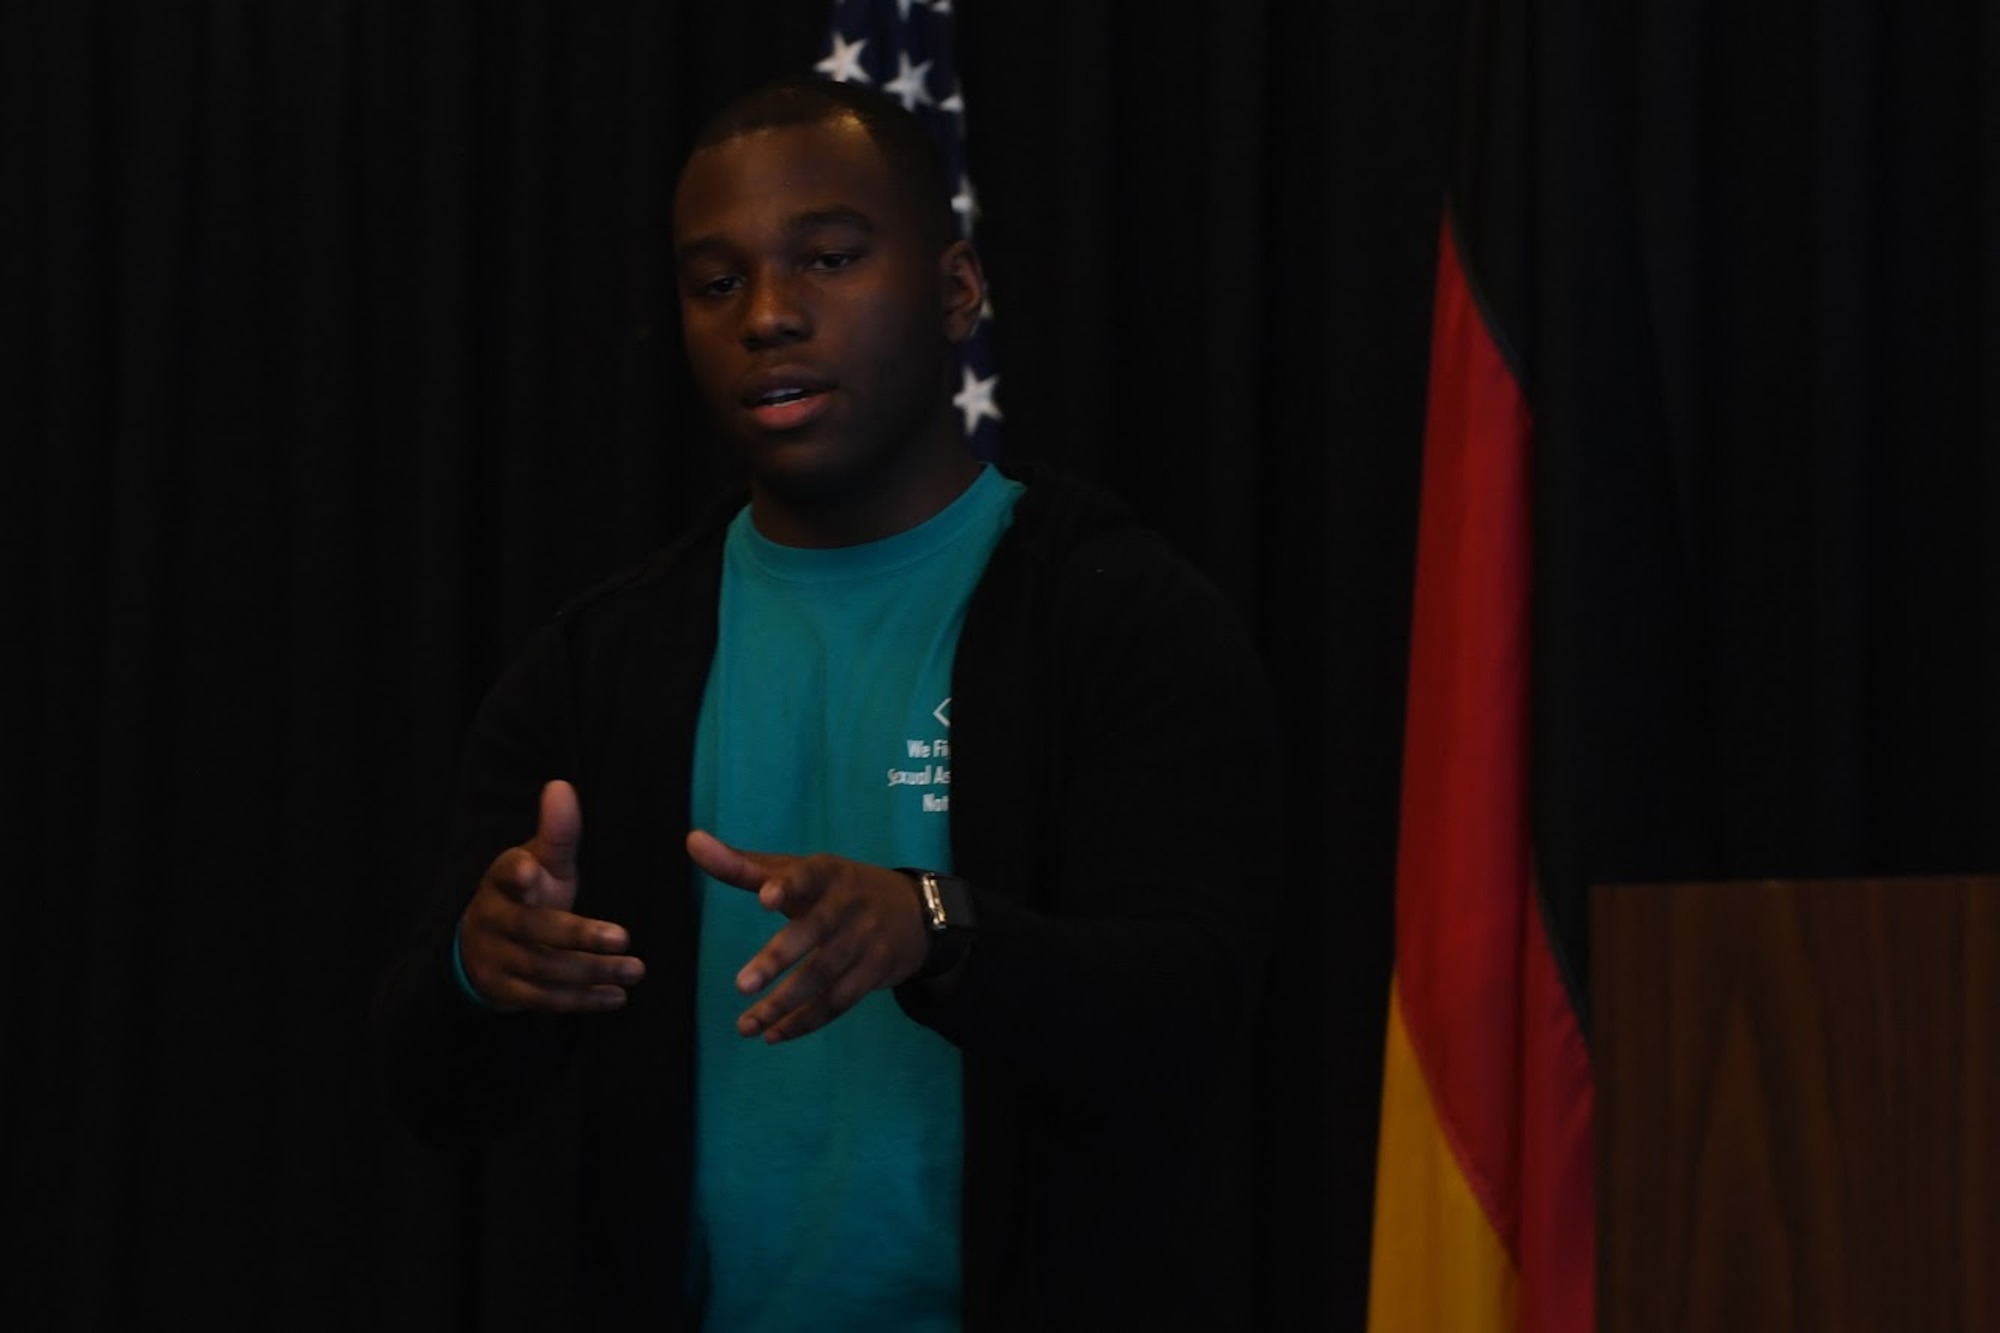 U.S. Air Force Staff Sgt. George Linen, 786th Civil Engineer Squadron electrical systems supervisor and sexual assault survivor, performs an original poem called “Speak” during the Sexual Assault Prevention and Response Leadership Breakfast at Ramstein Air Base, April 12, 2018.